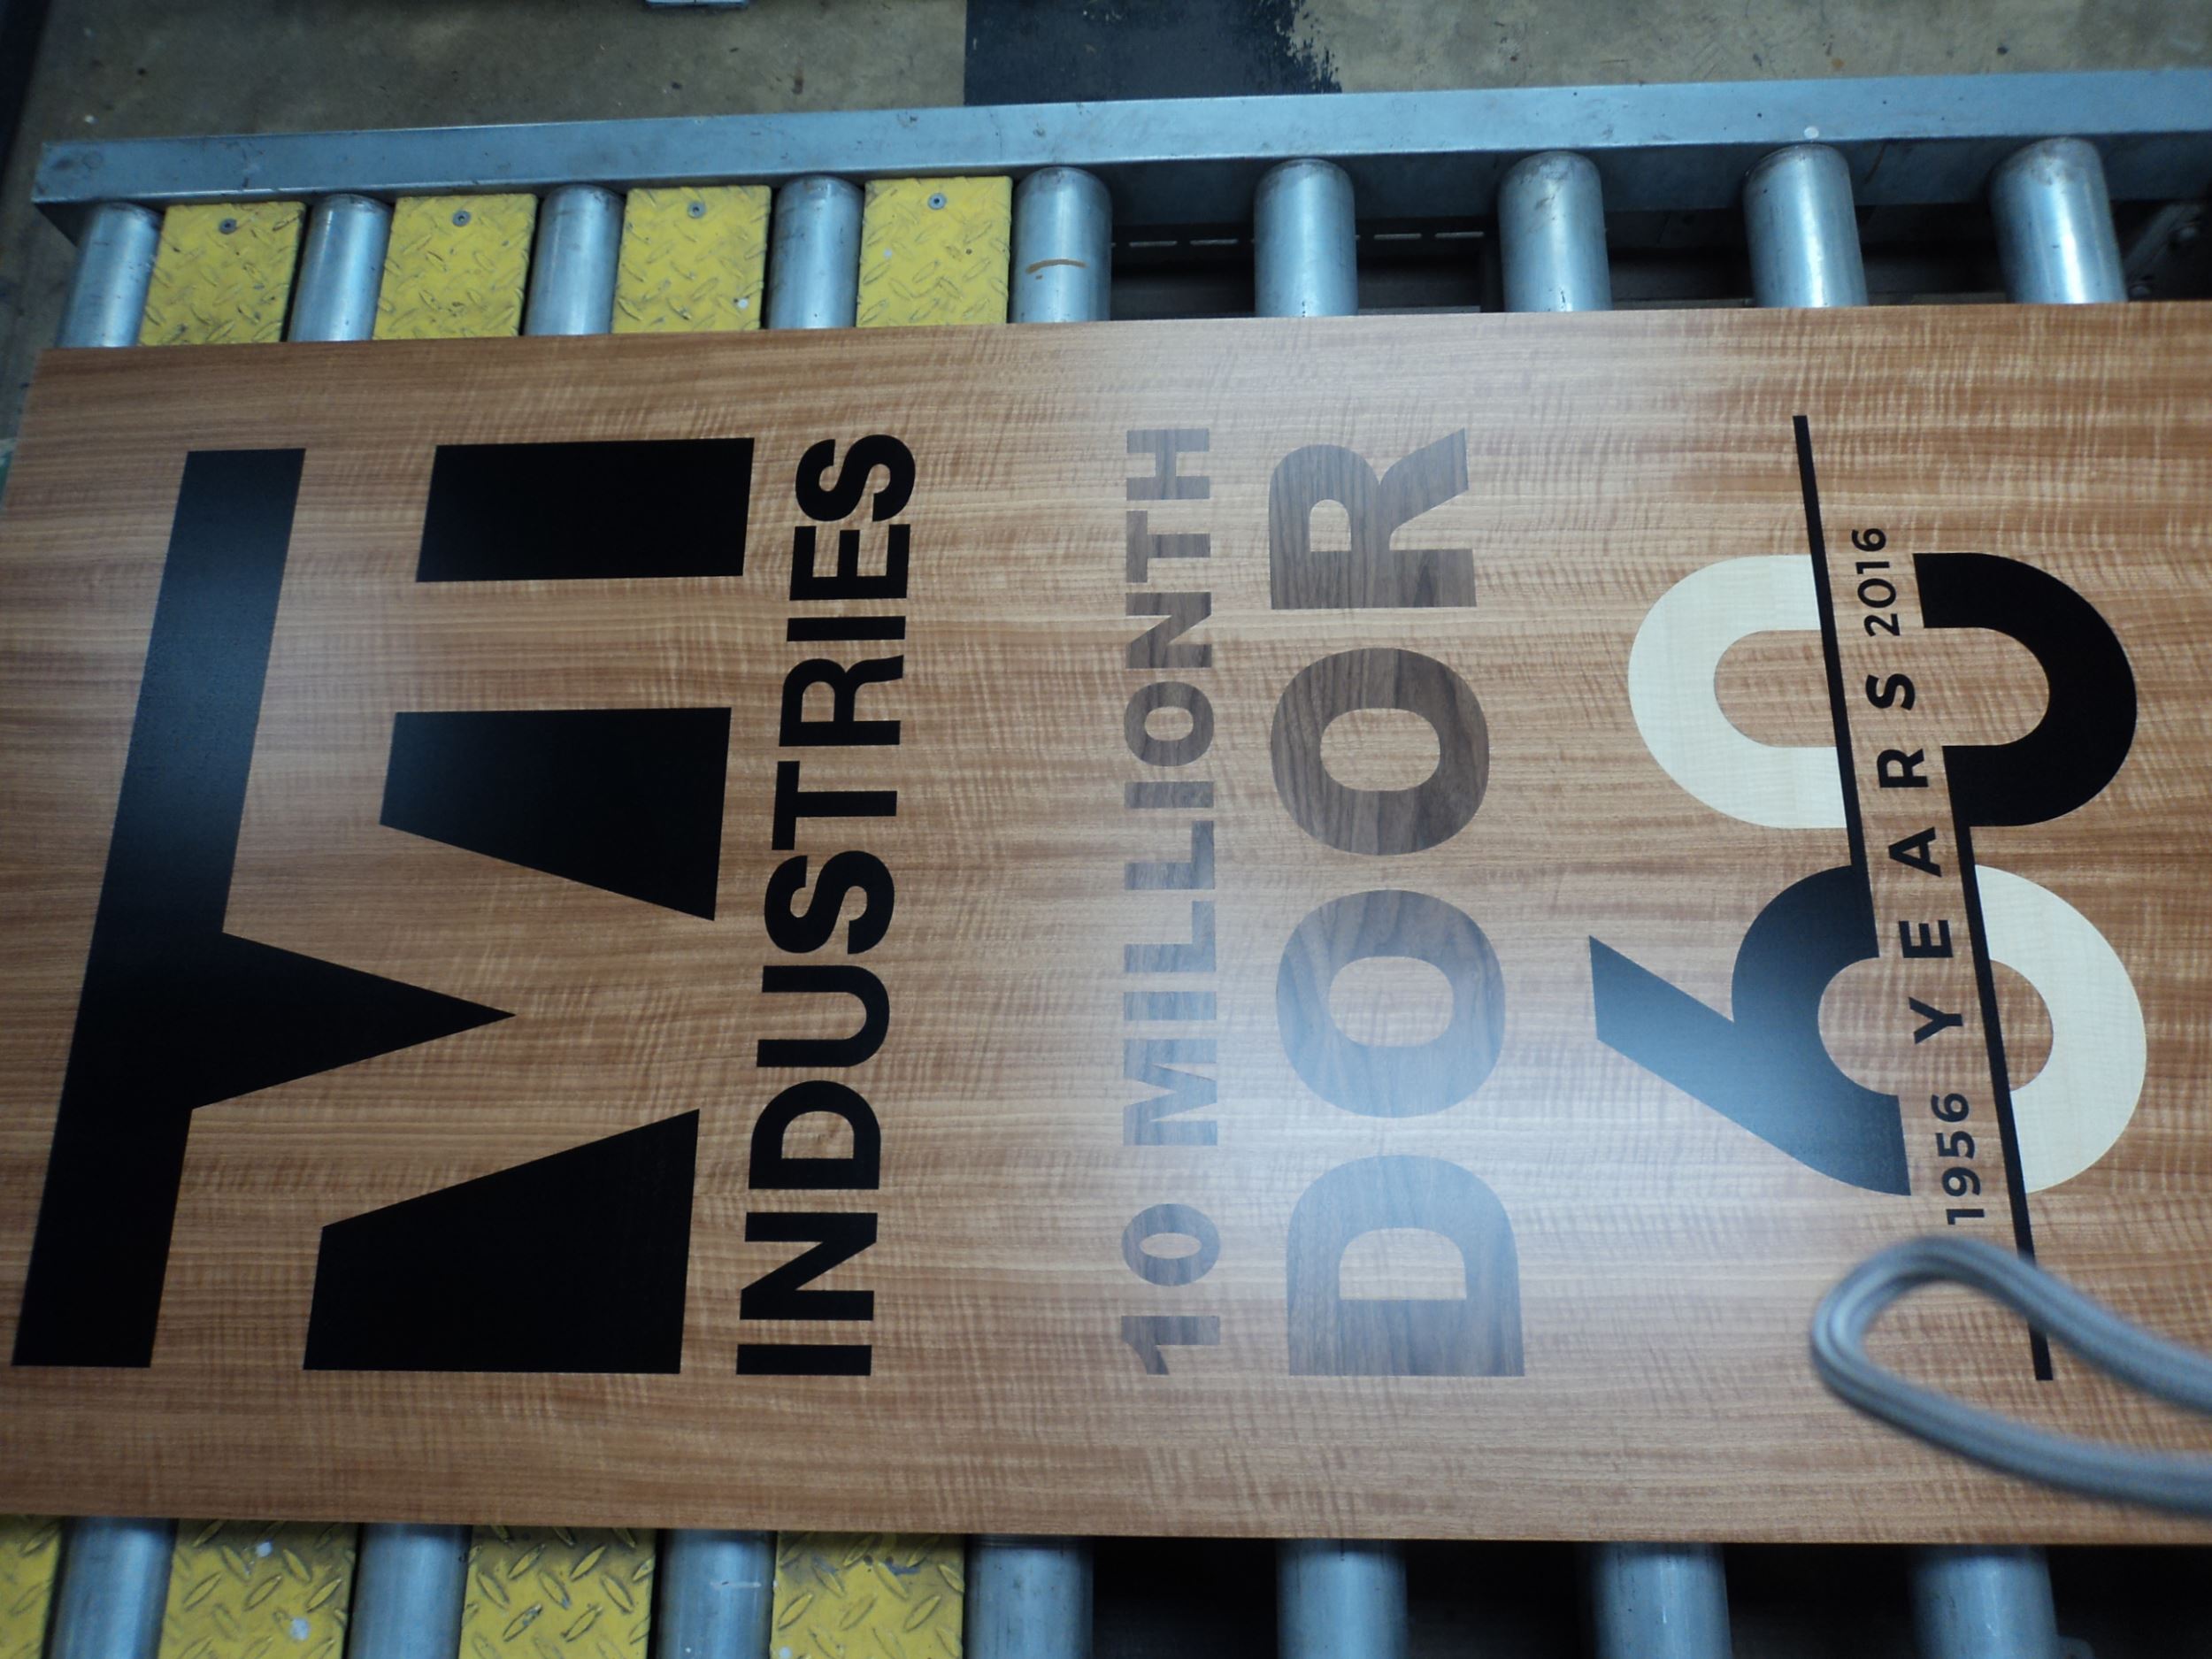 VT Industries, Inc. Produces 10 Millionth Door in Holstein, IA Manufacturing Facility